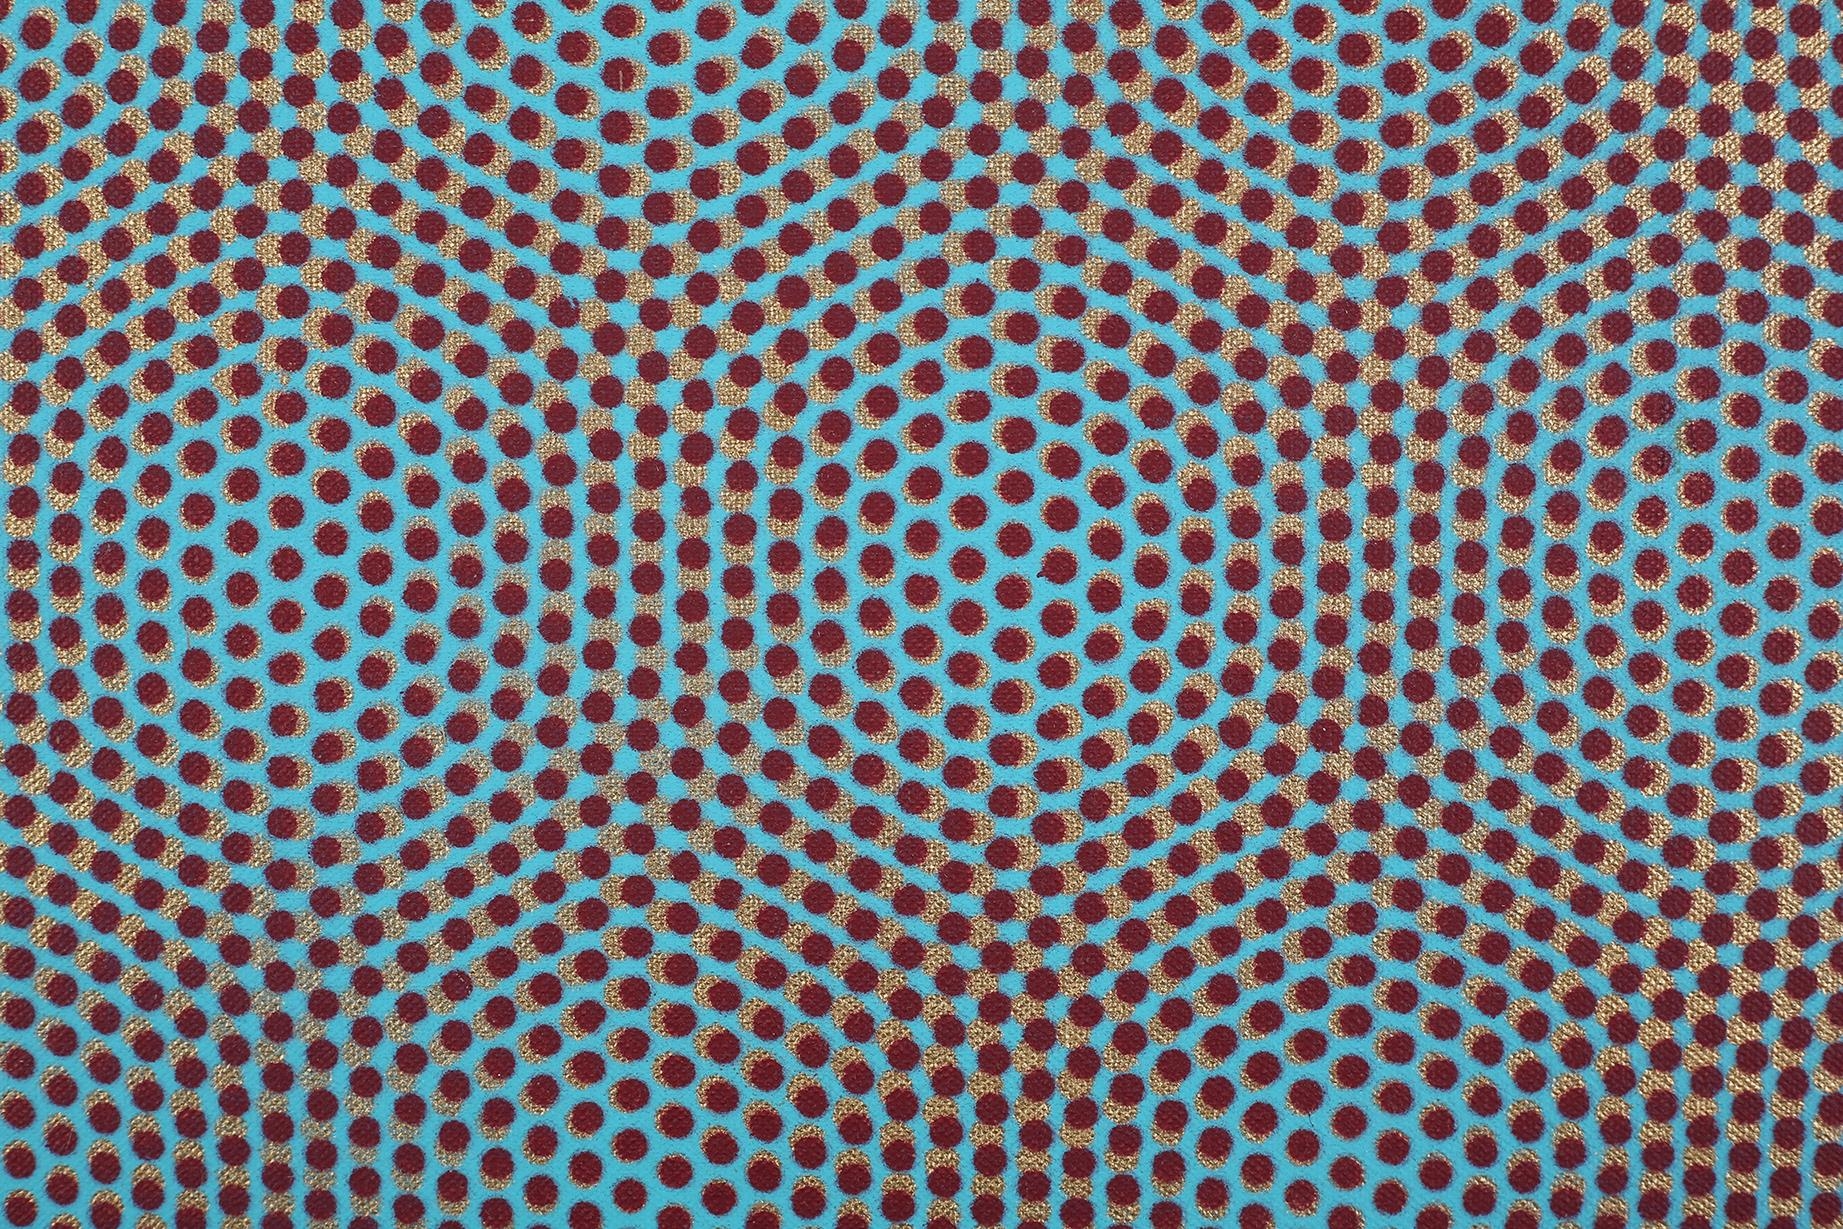 ARR Kate Allen, 20th/21st century, Gold, pattern of brown overlapping gold on turquoise, oil on - Image 2 of 3